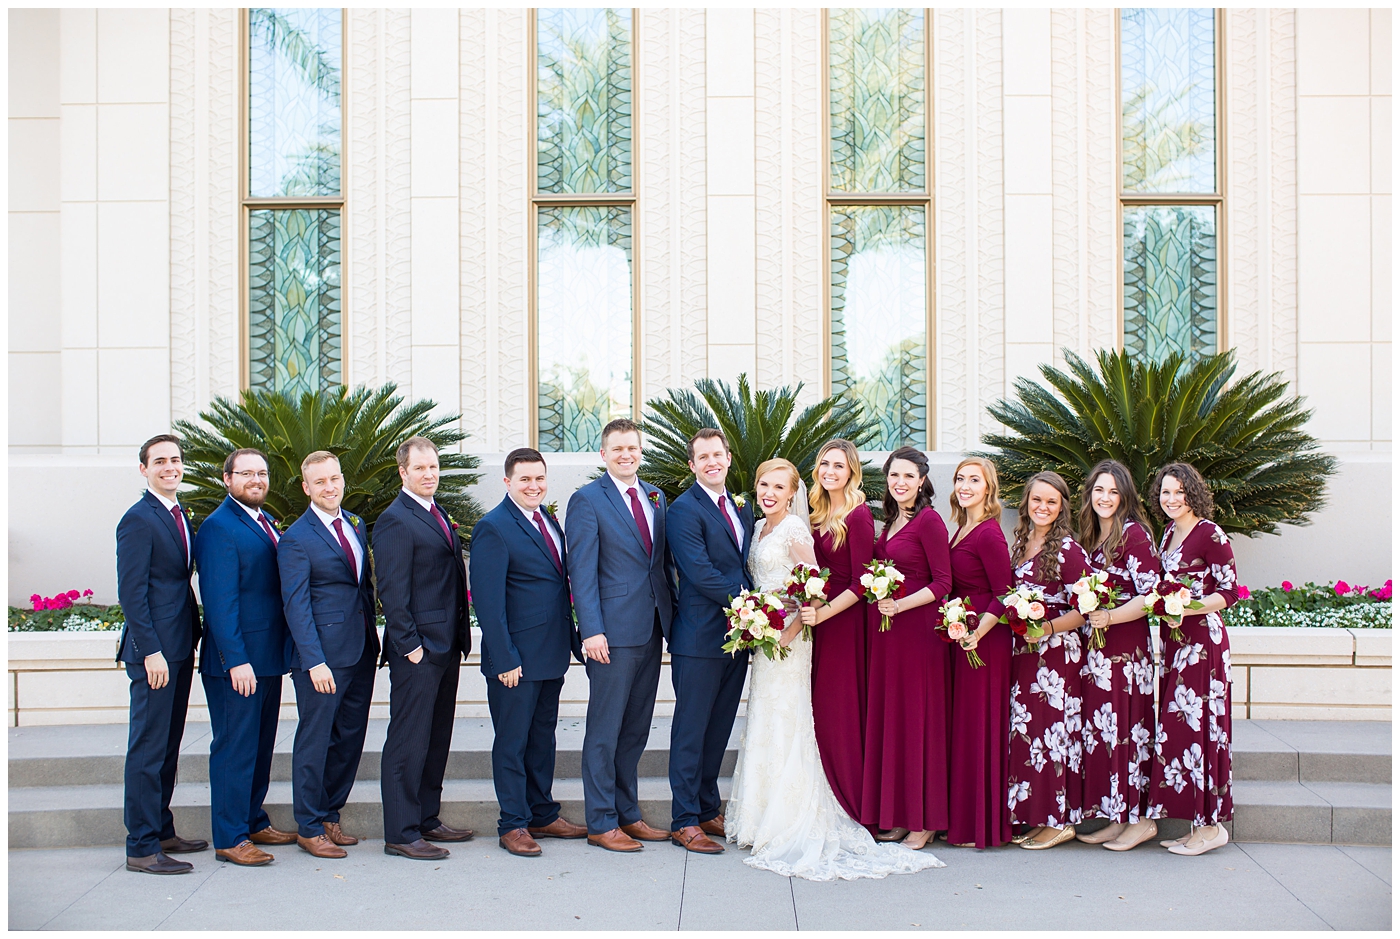 bride in sleeved lace dress with burgundy, white, and green wedding bouquet with bridesmaids in long sleeve burgundy dresses and groom in navy suit with burgundy tie with groomsmen wedding party portrait at Gilbert LDS temple